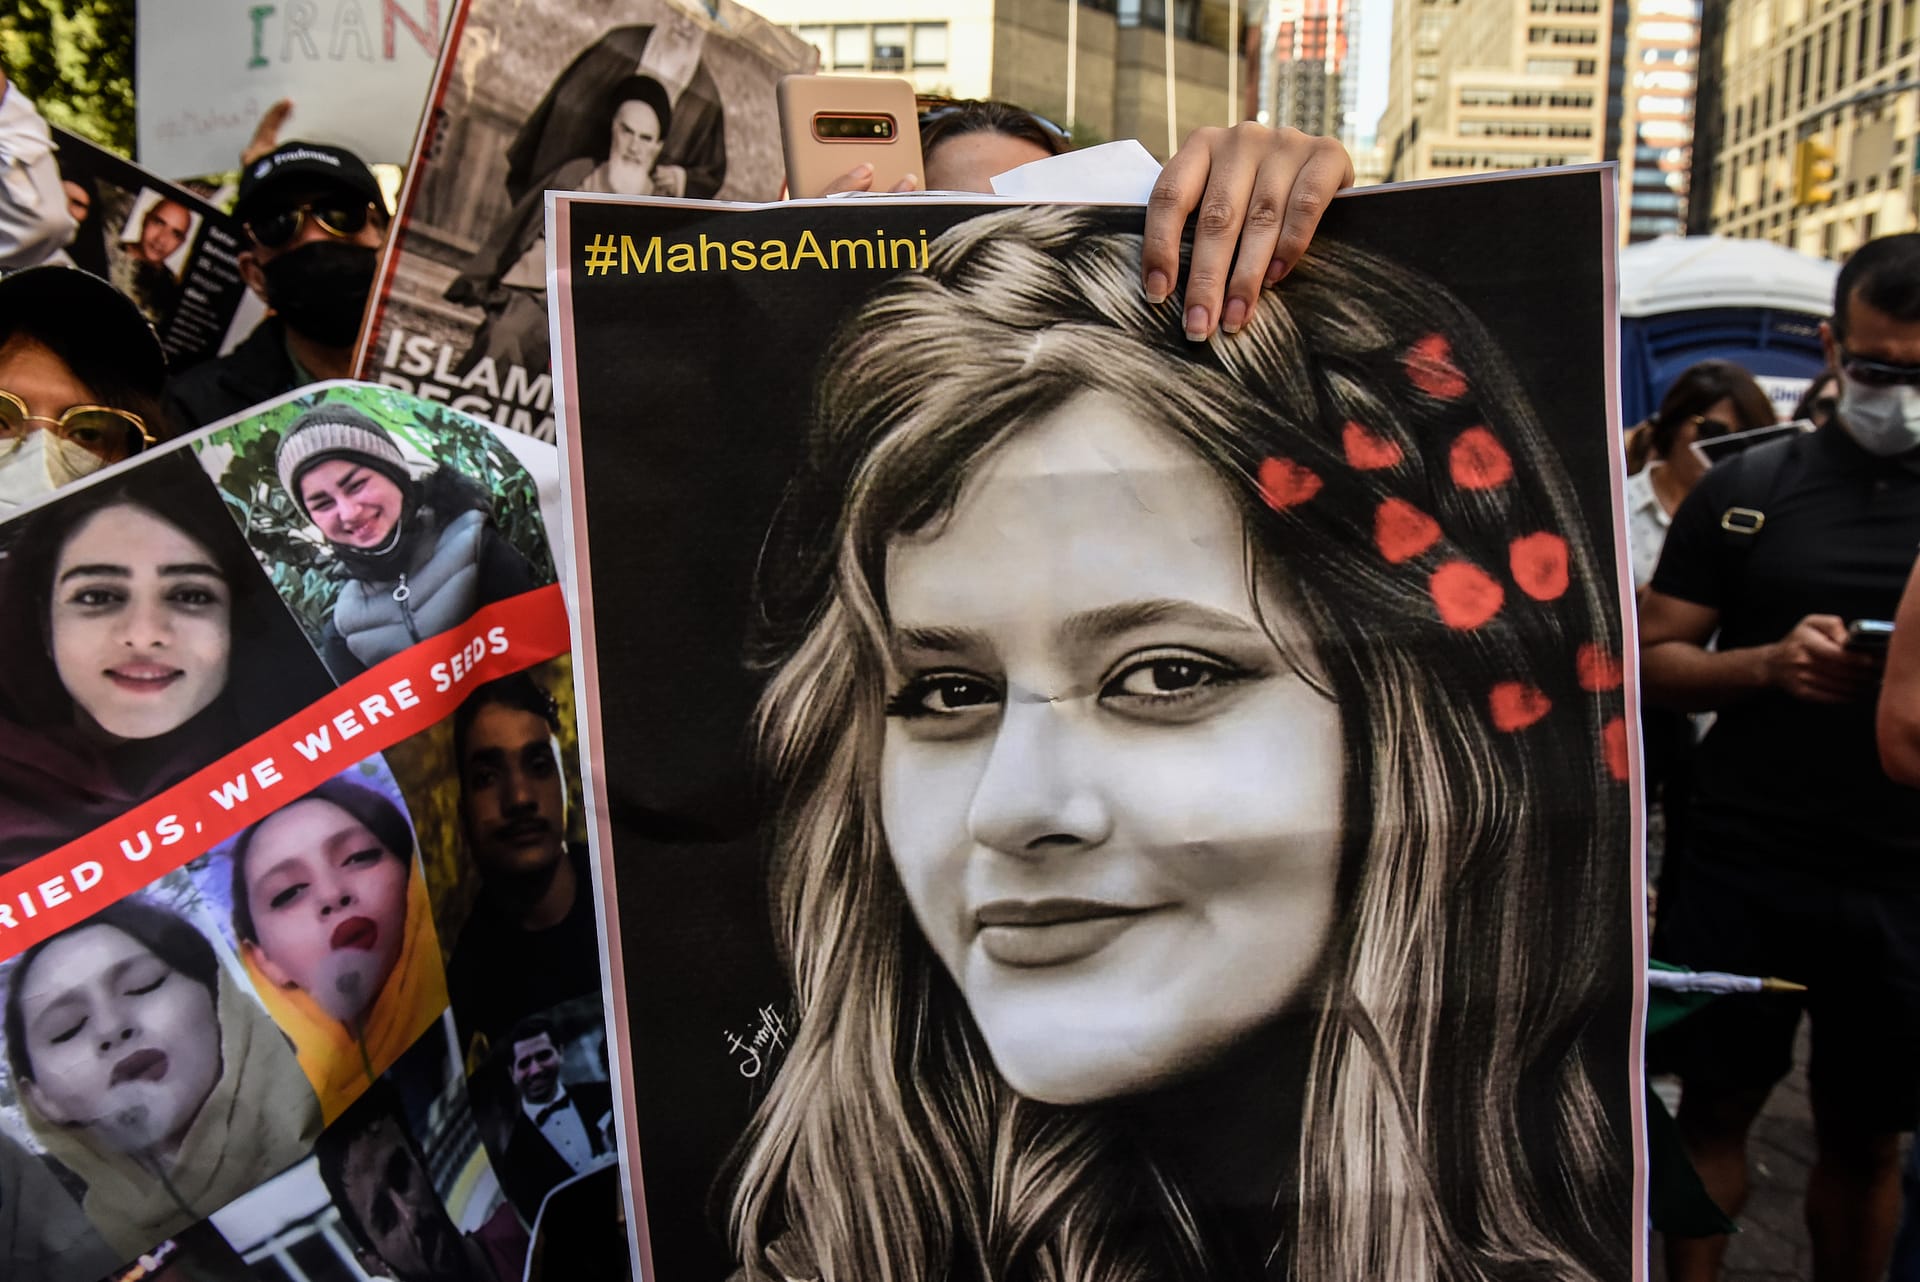 Artists and Activists Plan Mass Actions on Anniversary of Mahsa Amini’s Death